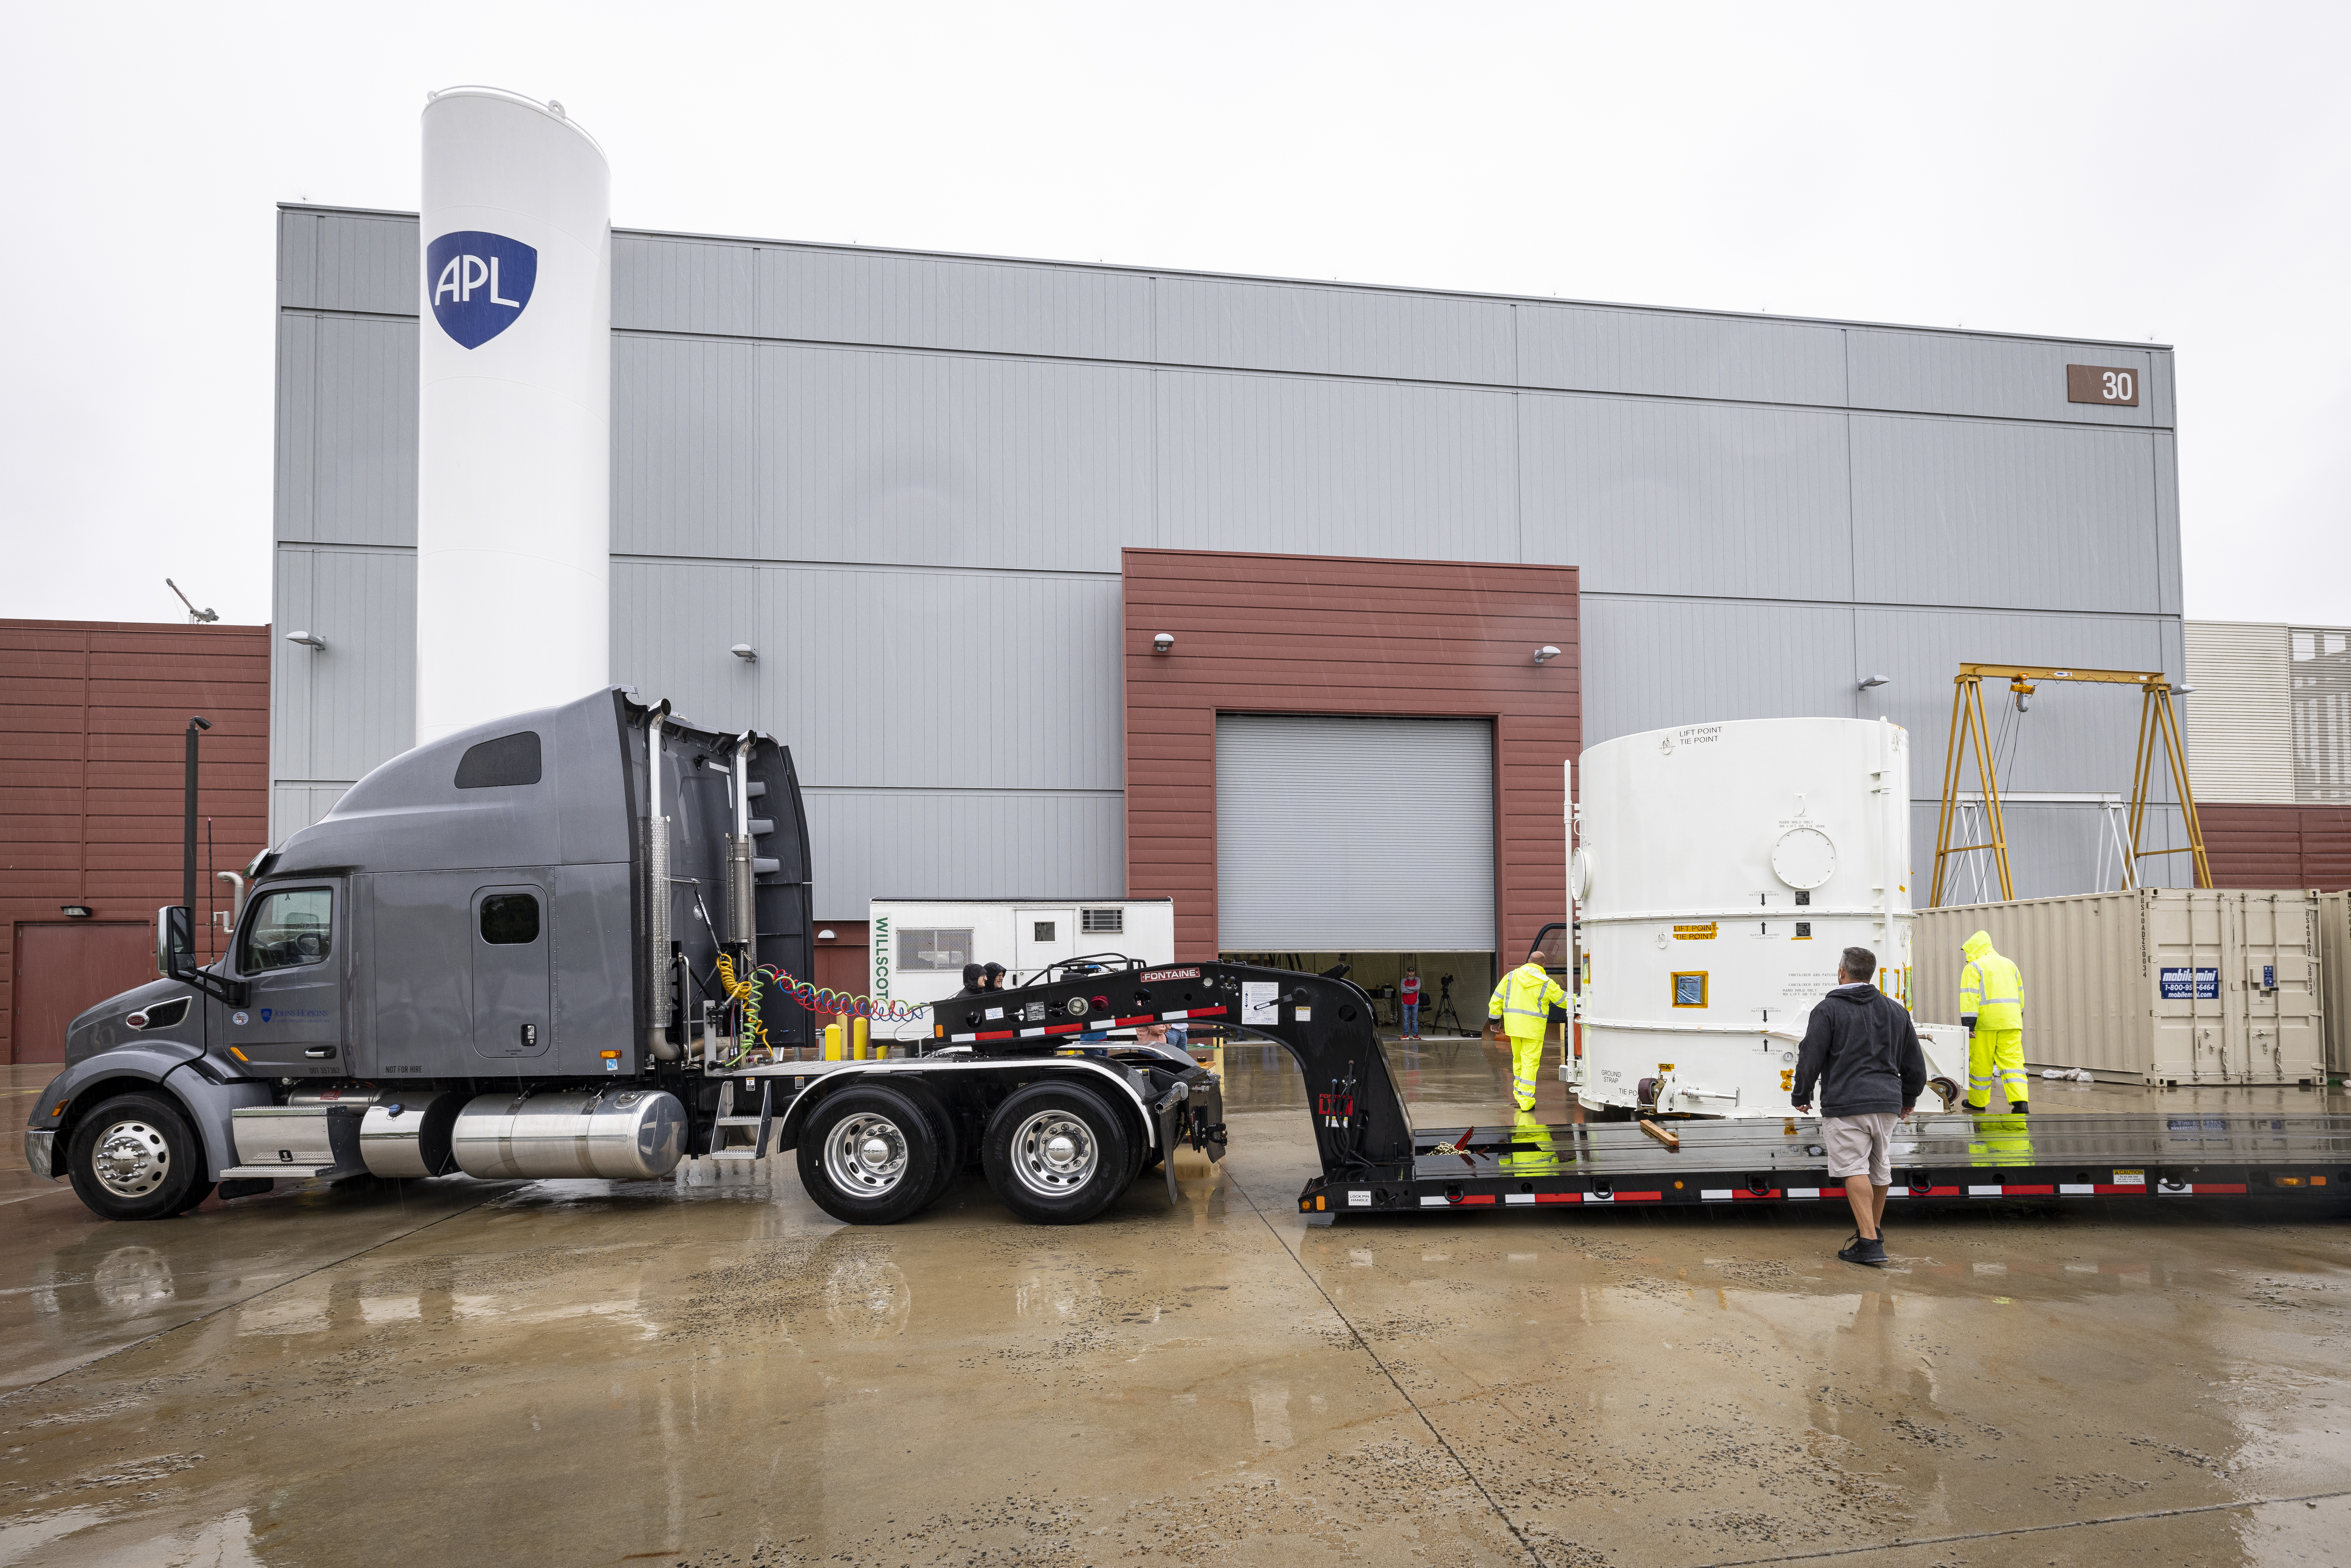 A tractor trailer sits parked outside a building with the APL shield on it and a white container with the Europa Clipper modules